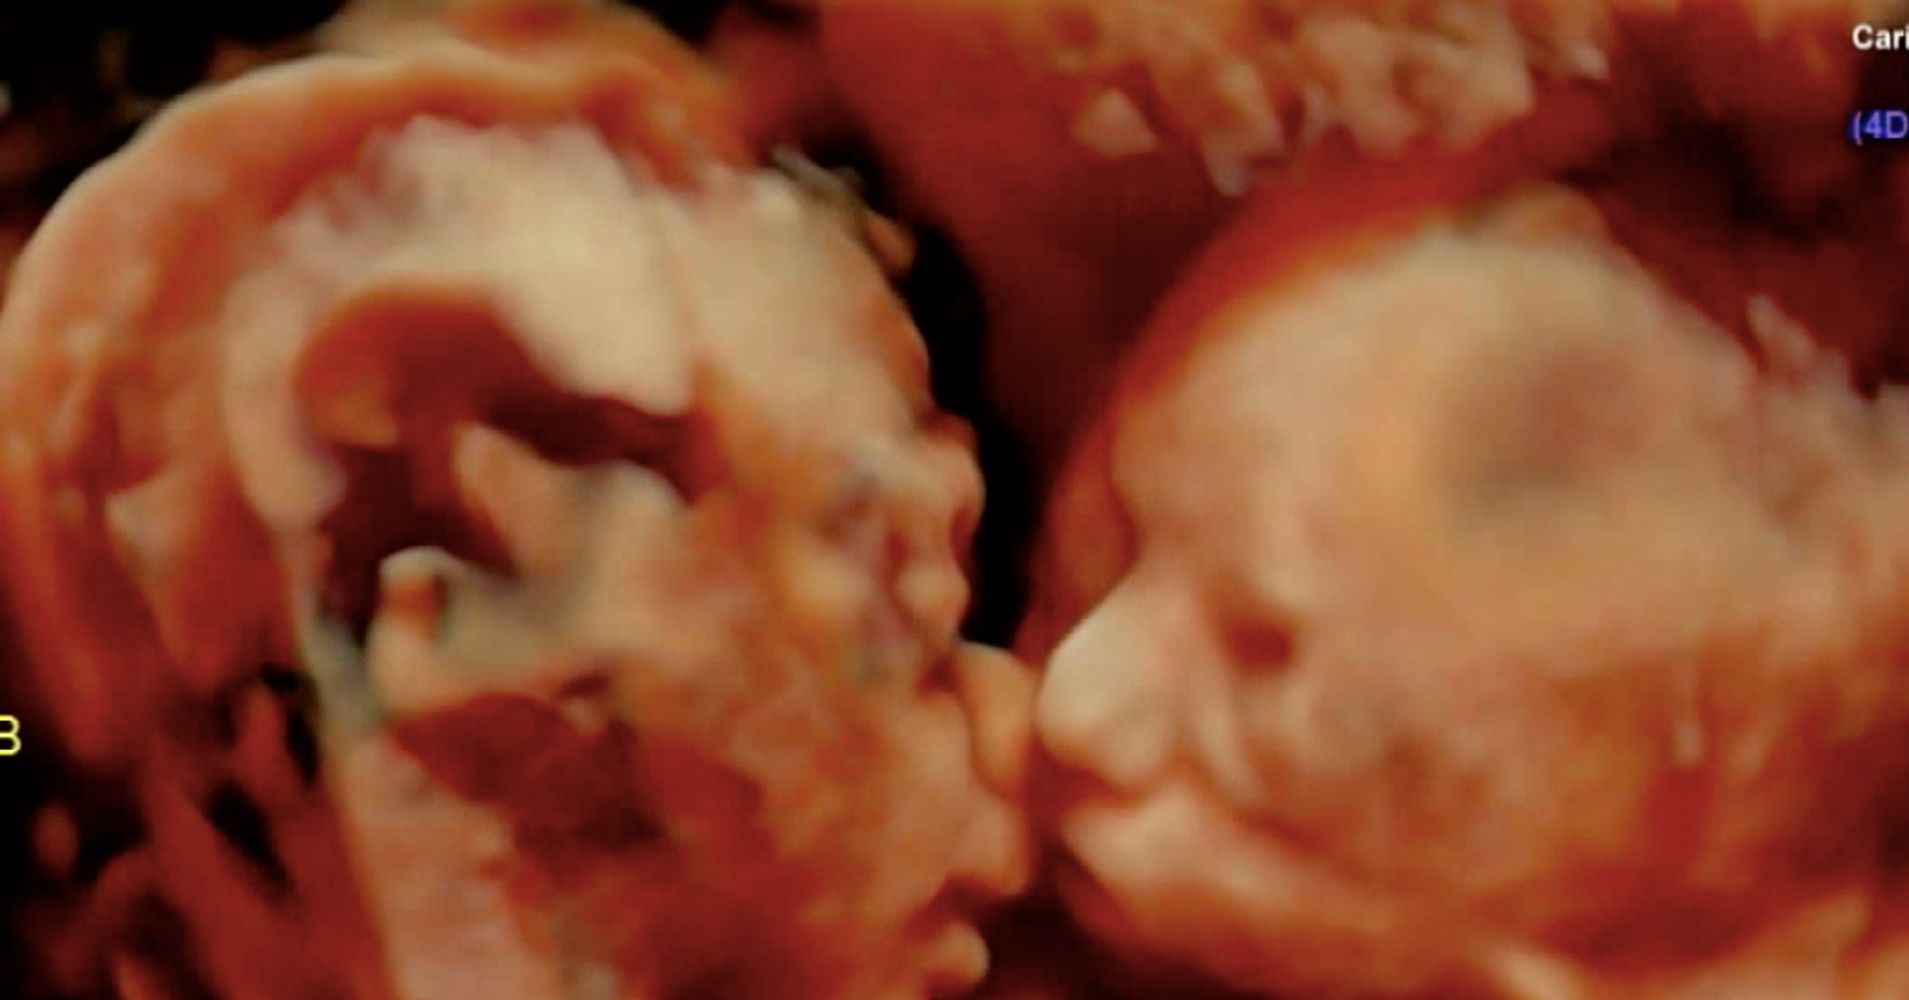 Amazing Ultrasound Shows Twins Sharing A Kiss In The Womb Huffpost 9060